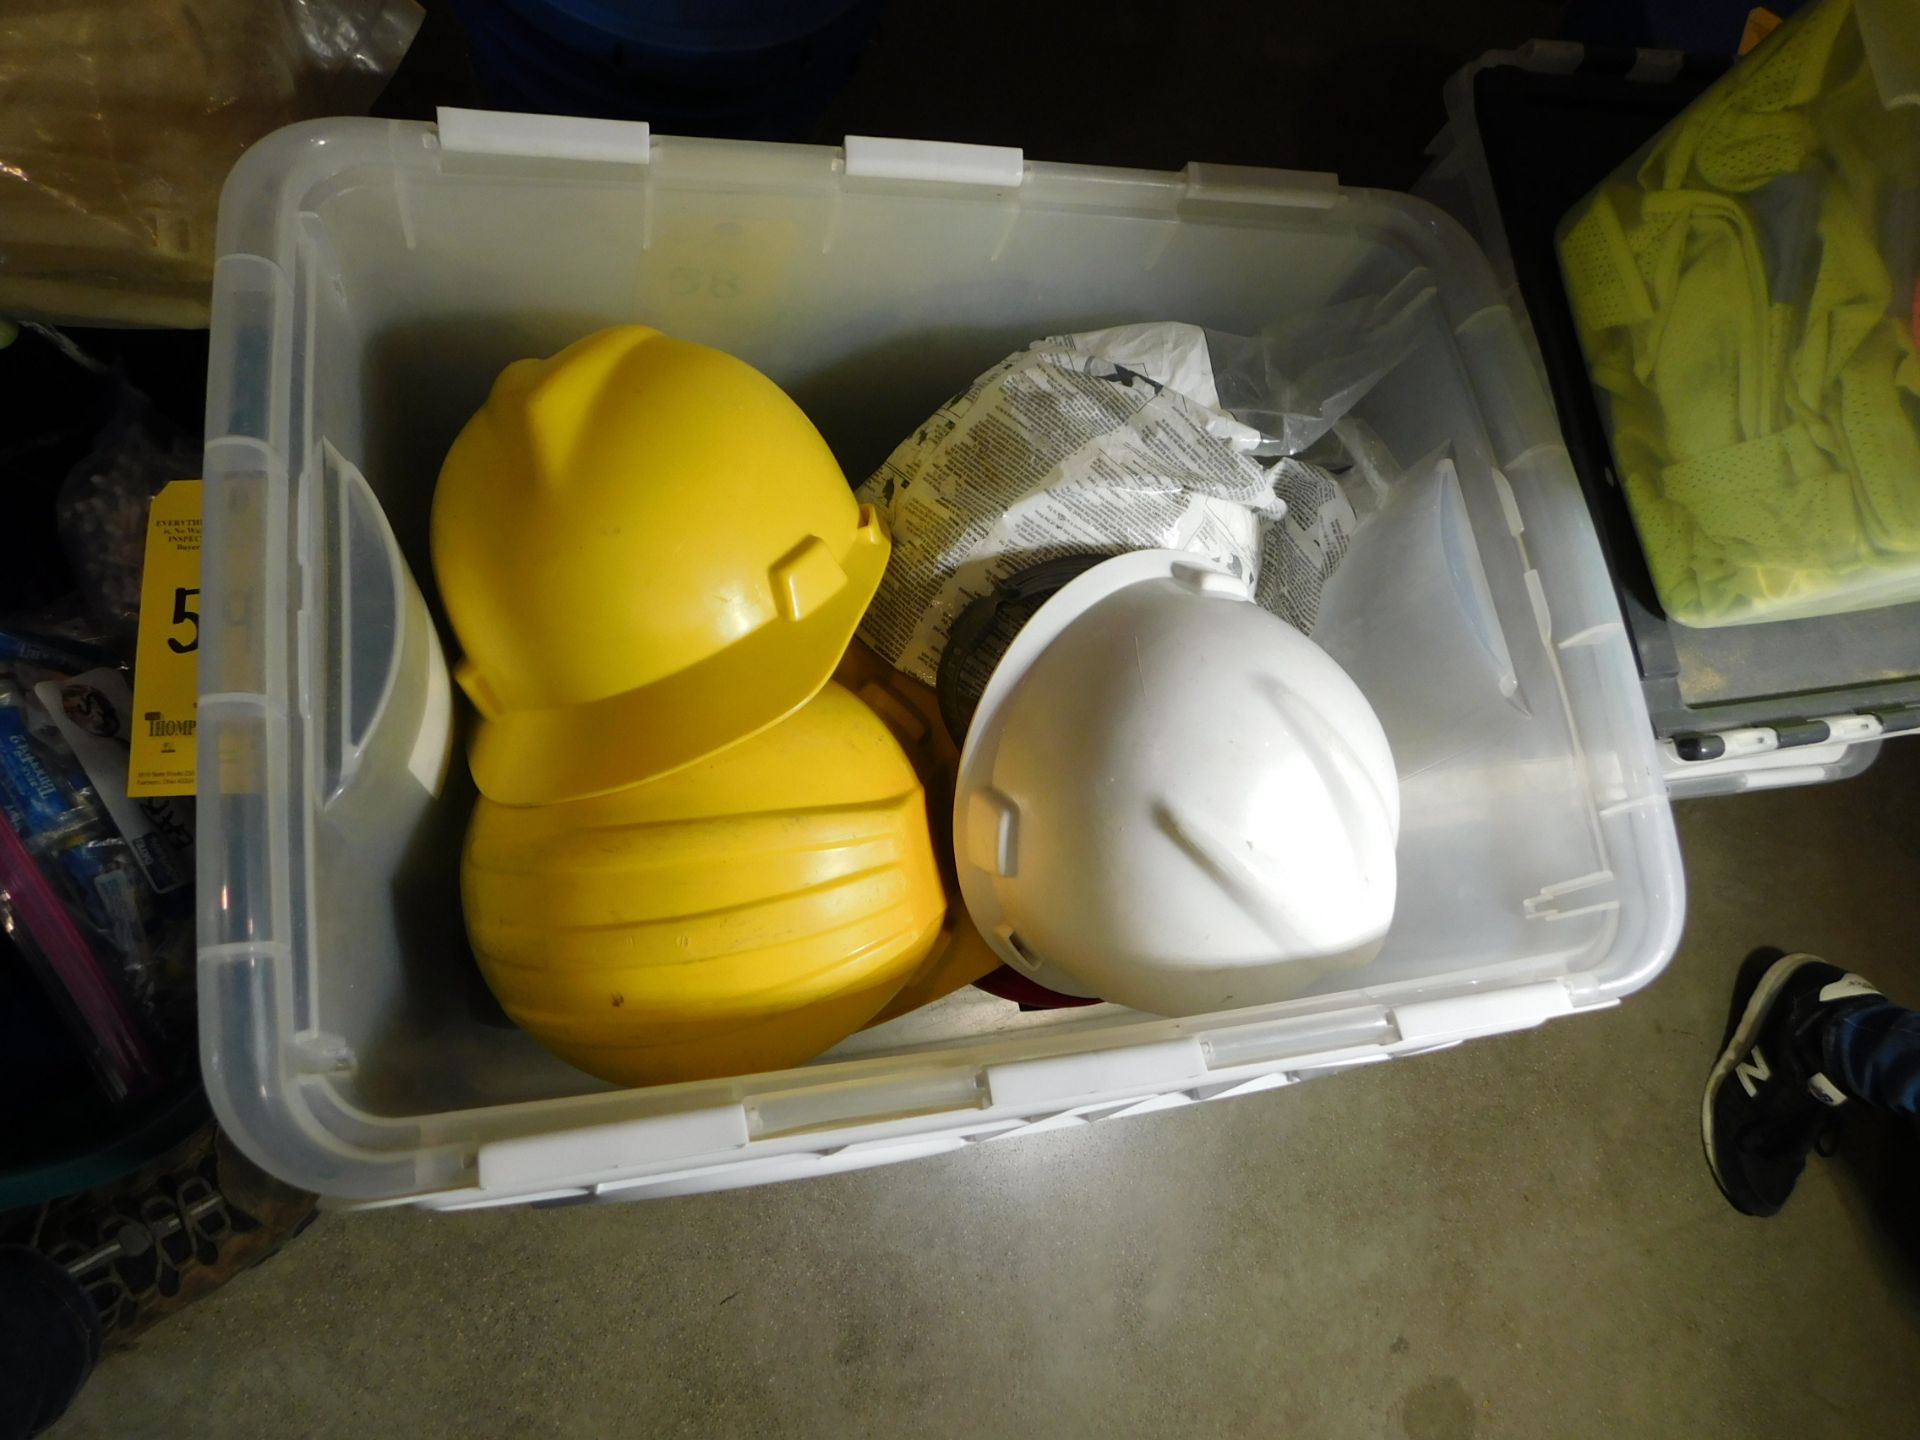 Misc. Safety hats and Vests